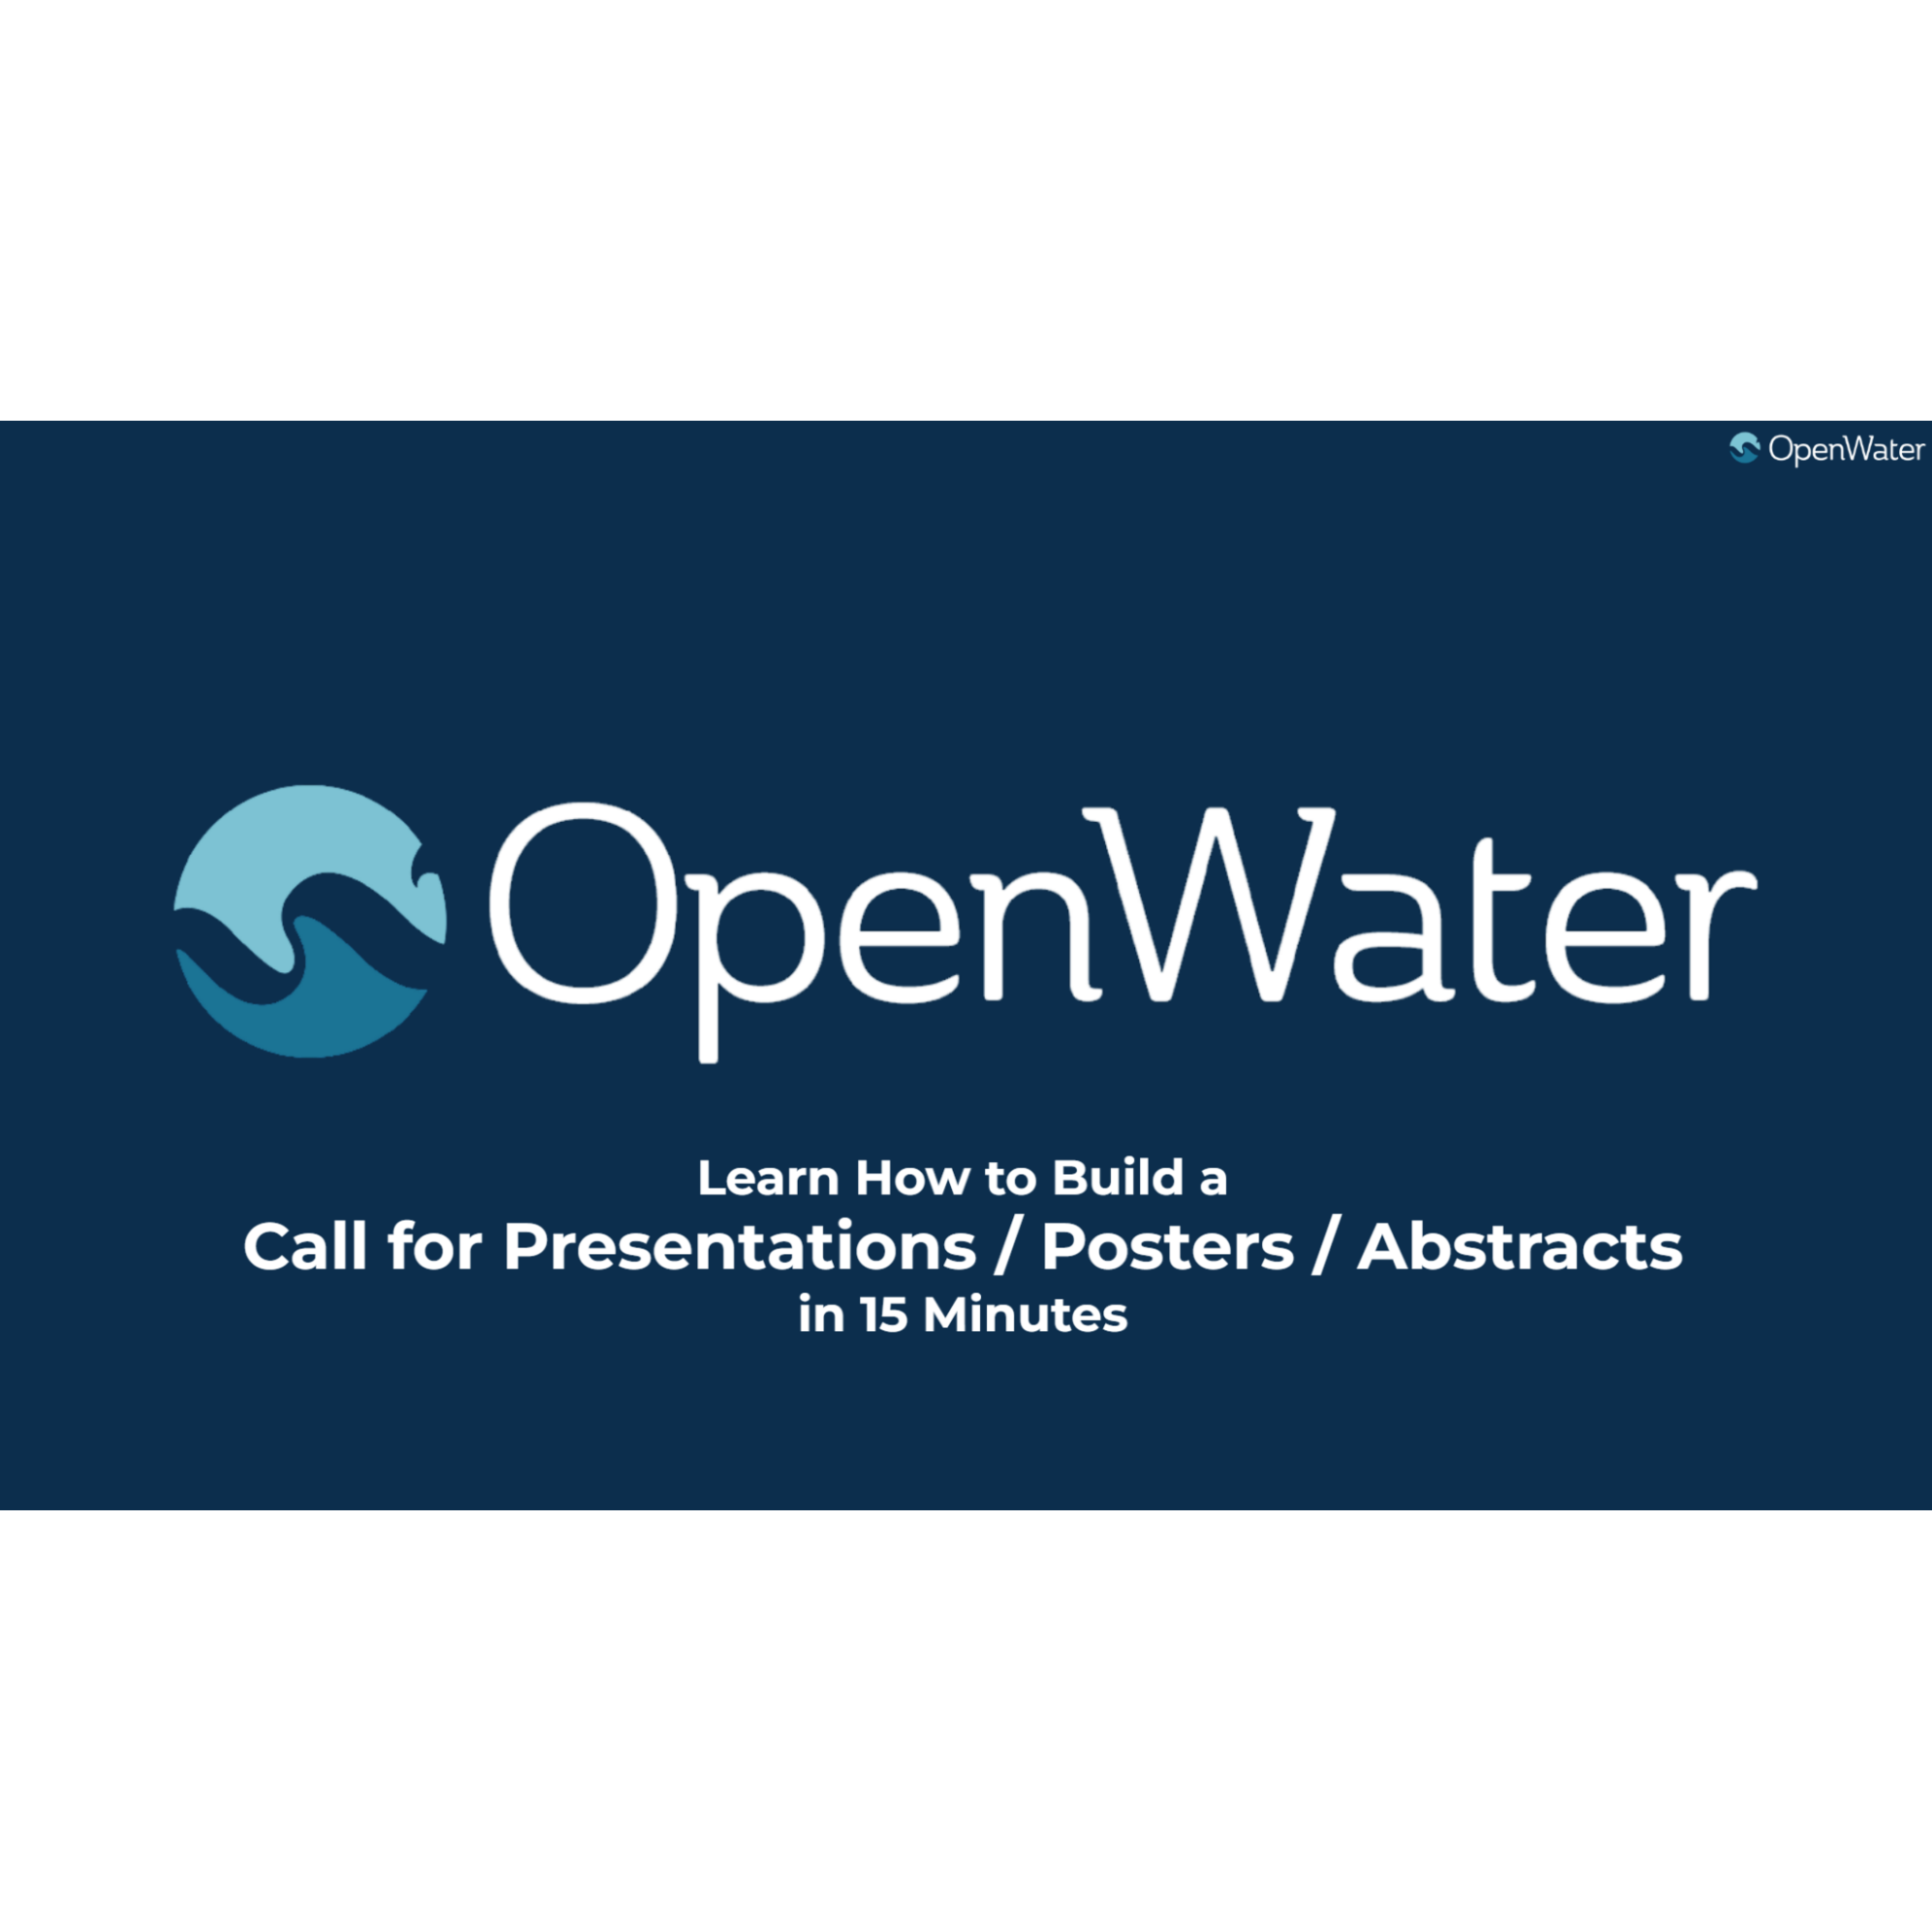 Call for Presentations / Posters / Abstracts